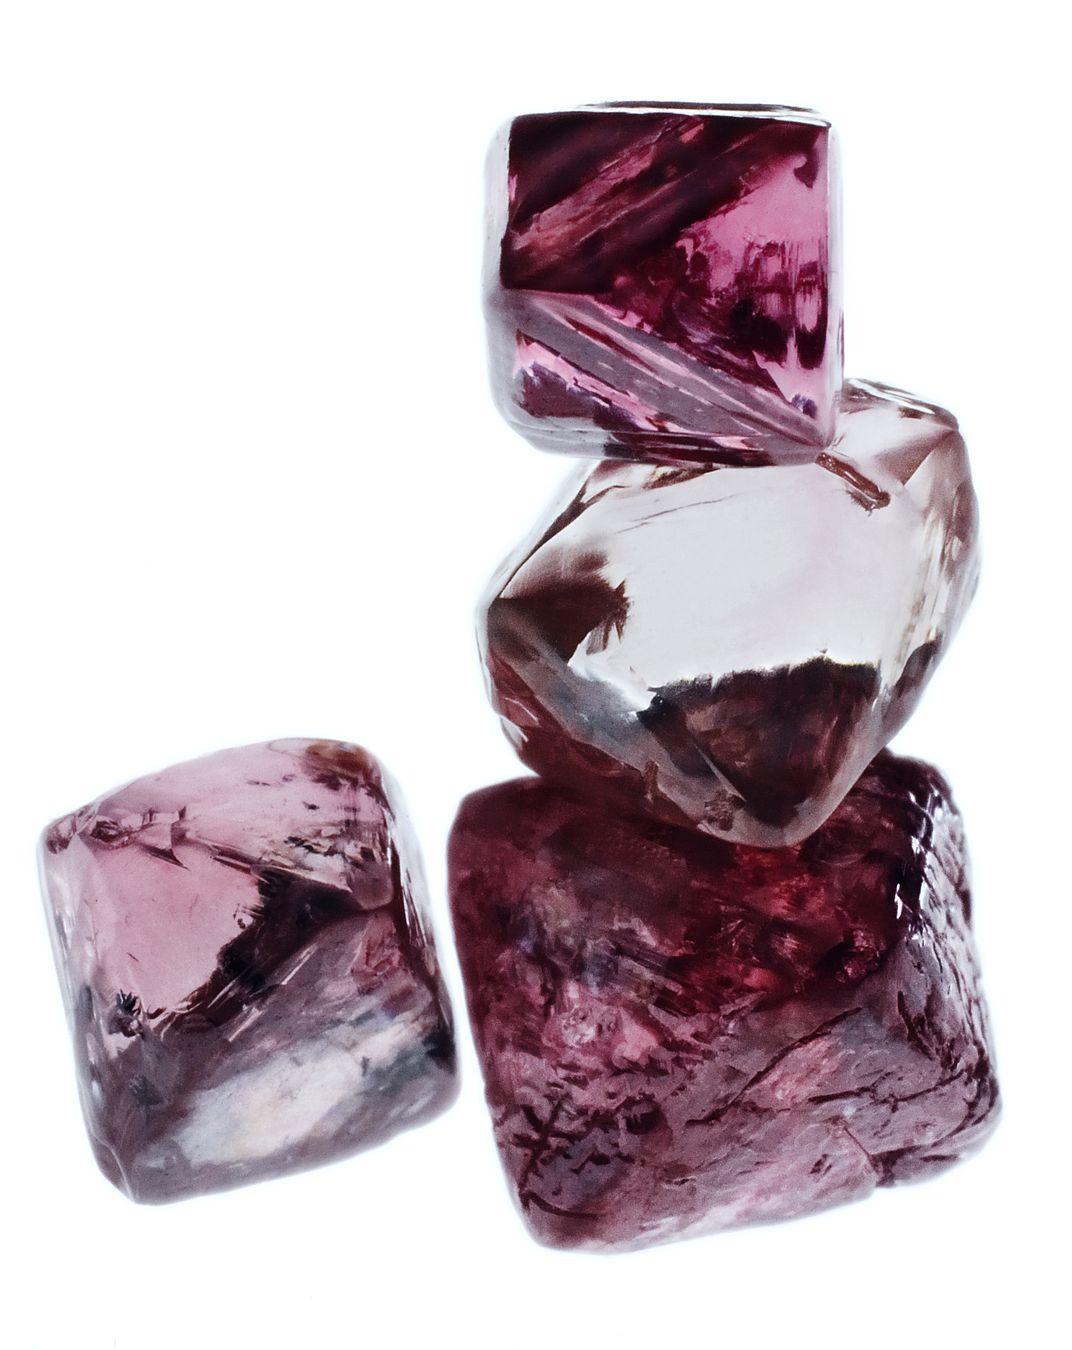 Pink diamonds: a modern history of one of the most valuable gems